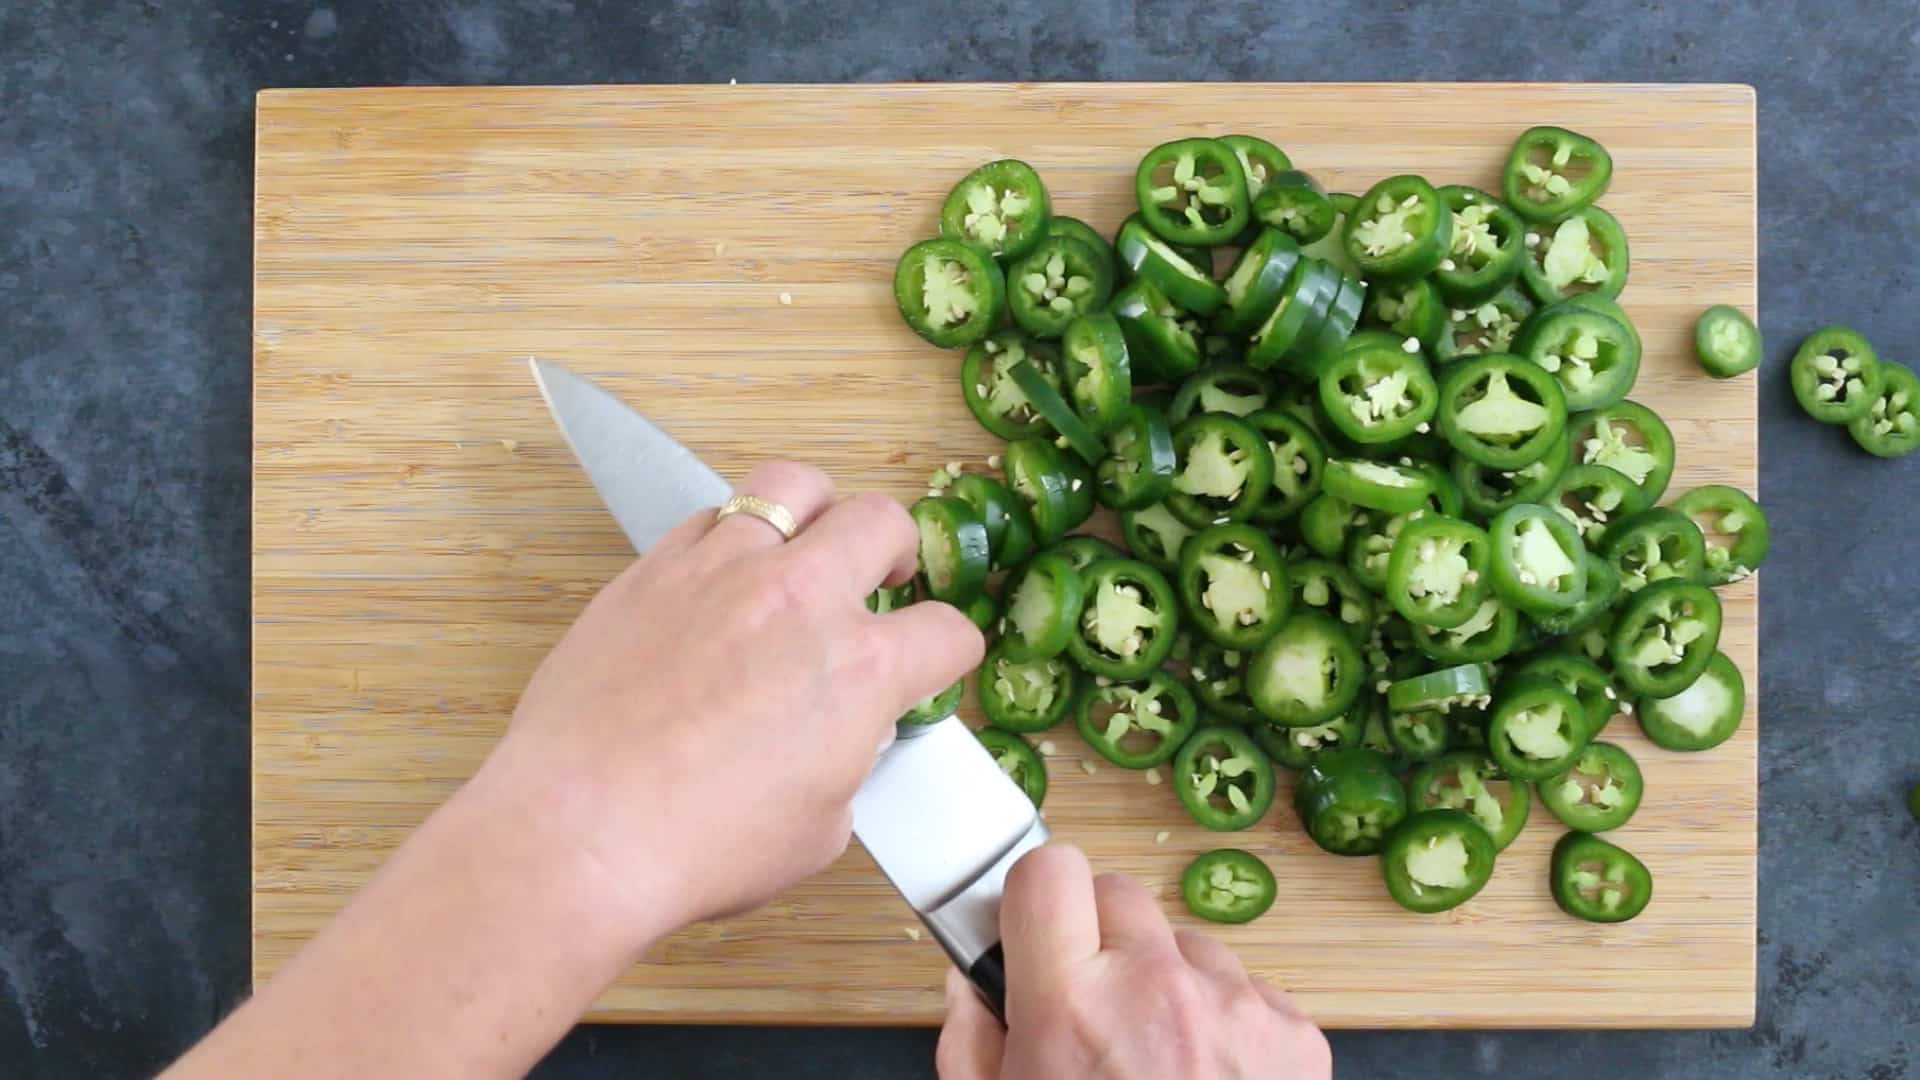 Chopping jalapeno peppers in a pan to make Candied Jalapenos (Cowboy Candy)